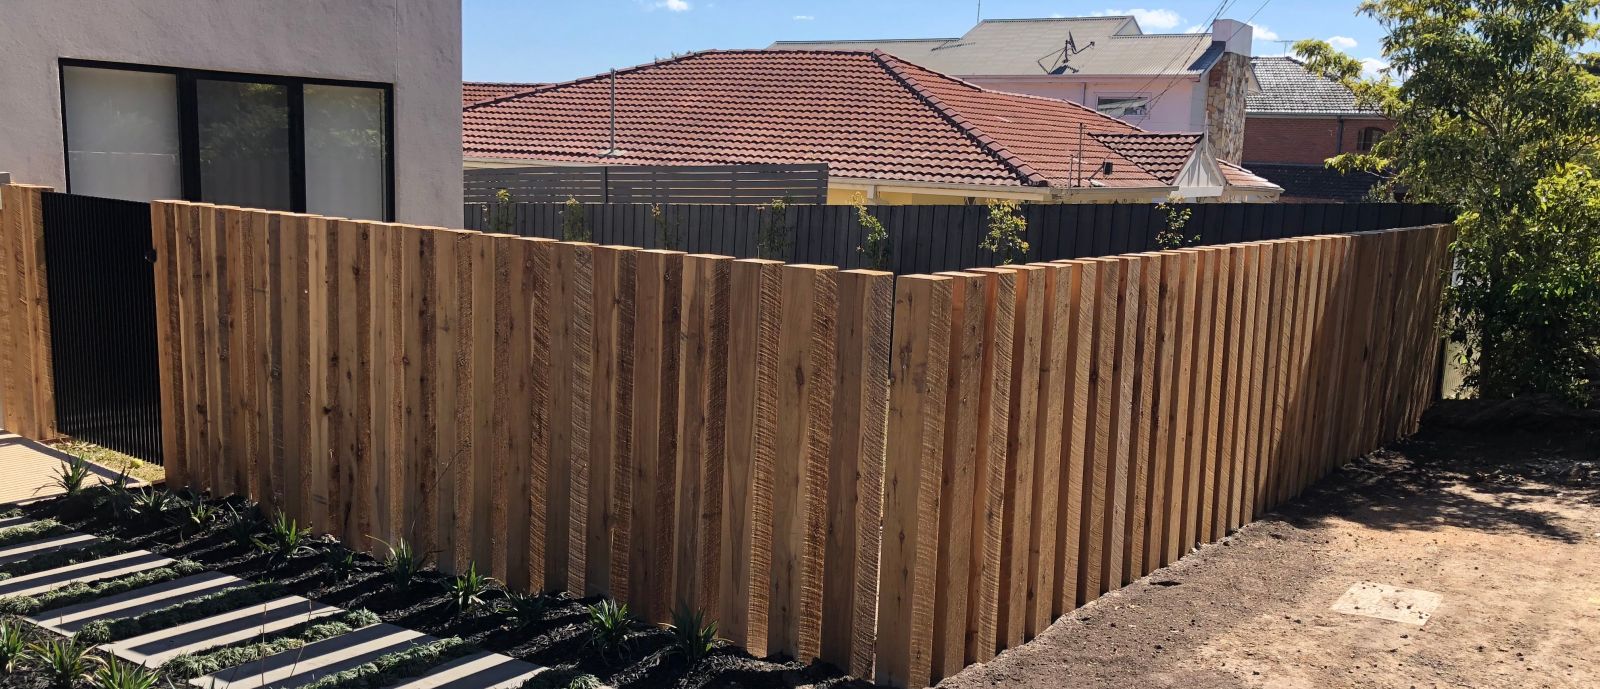 Security Fencing with Timber